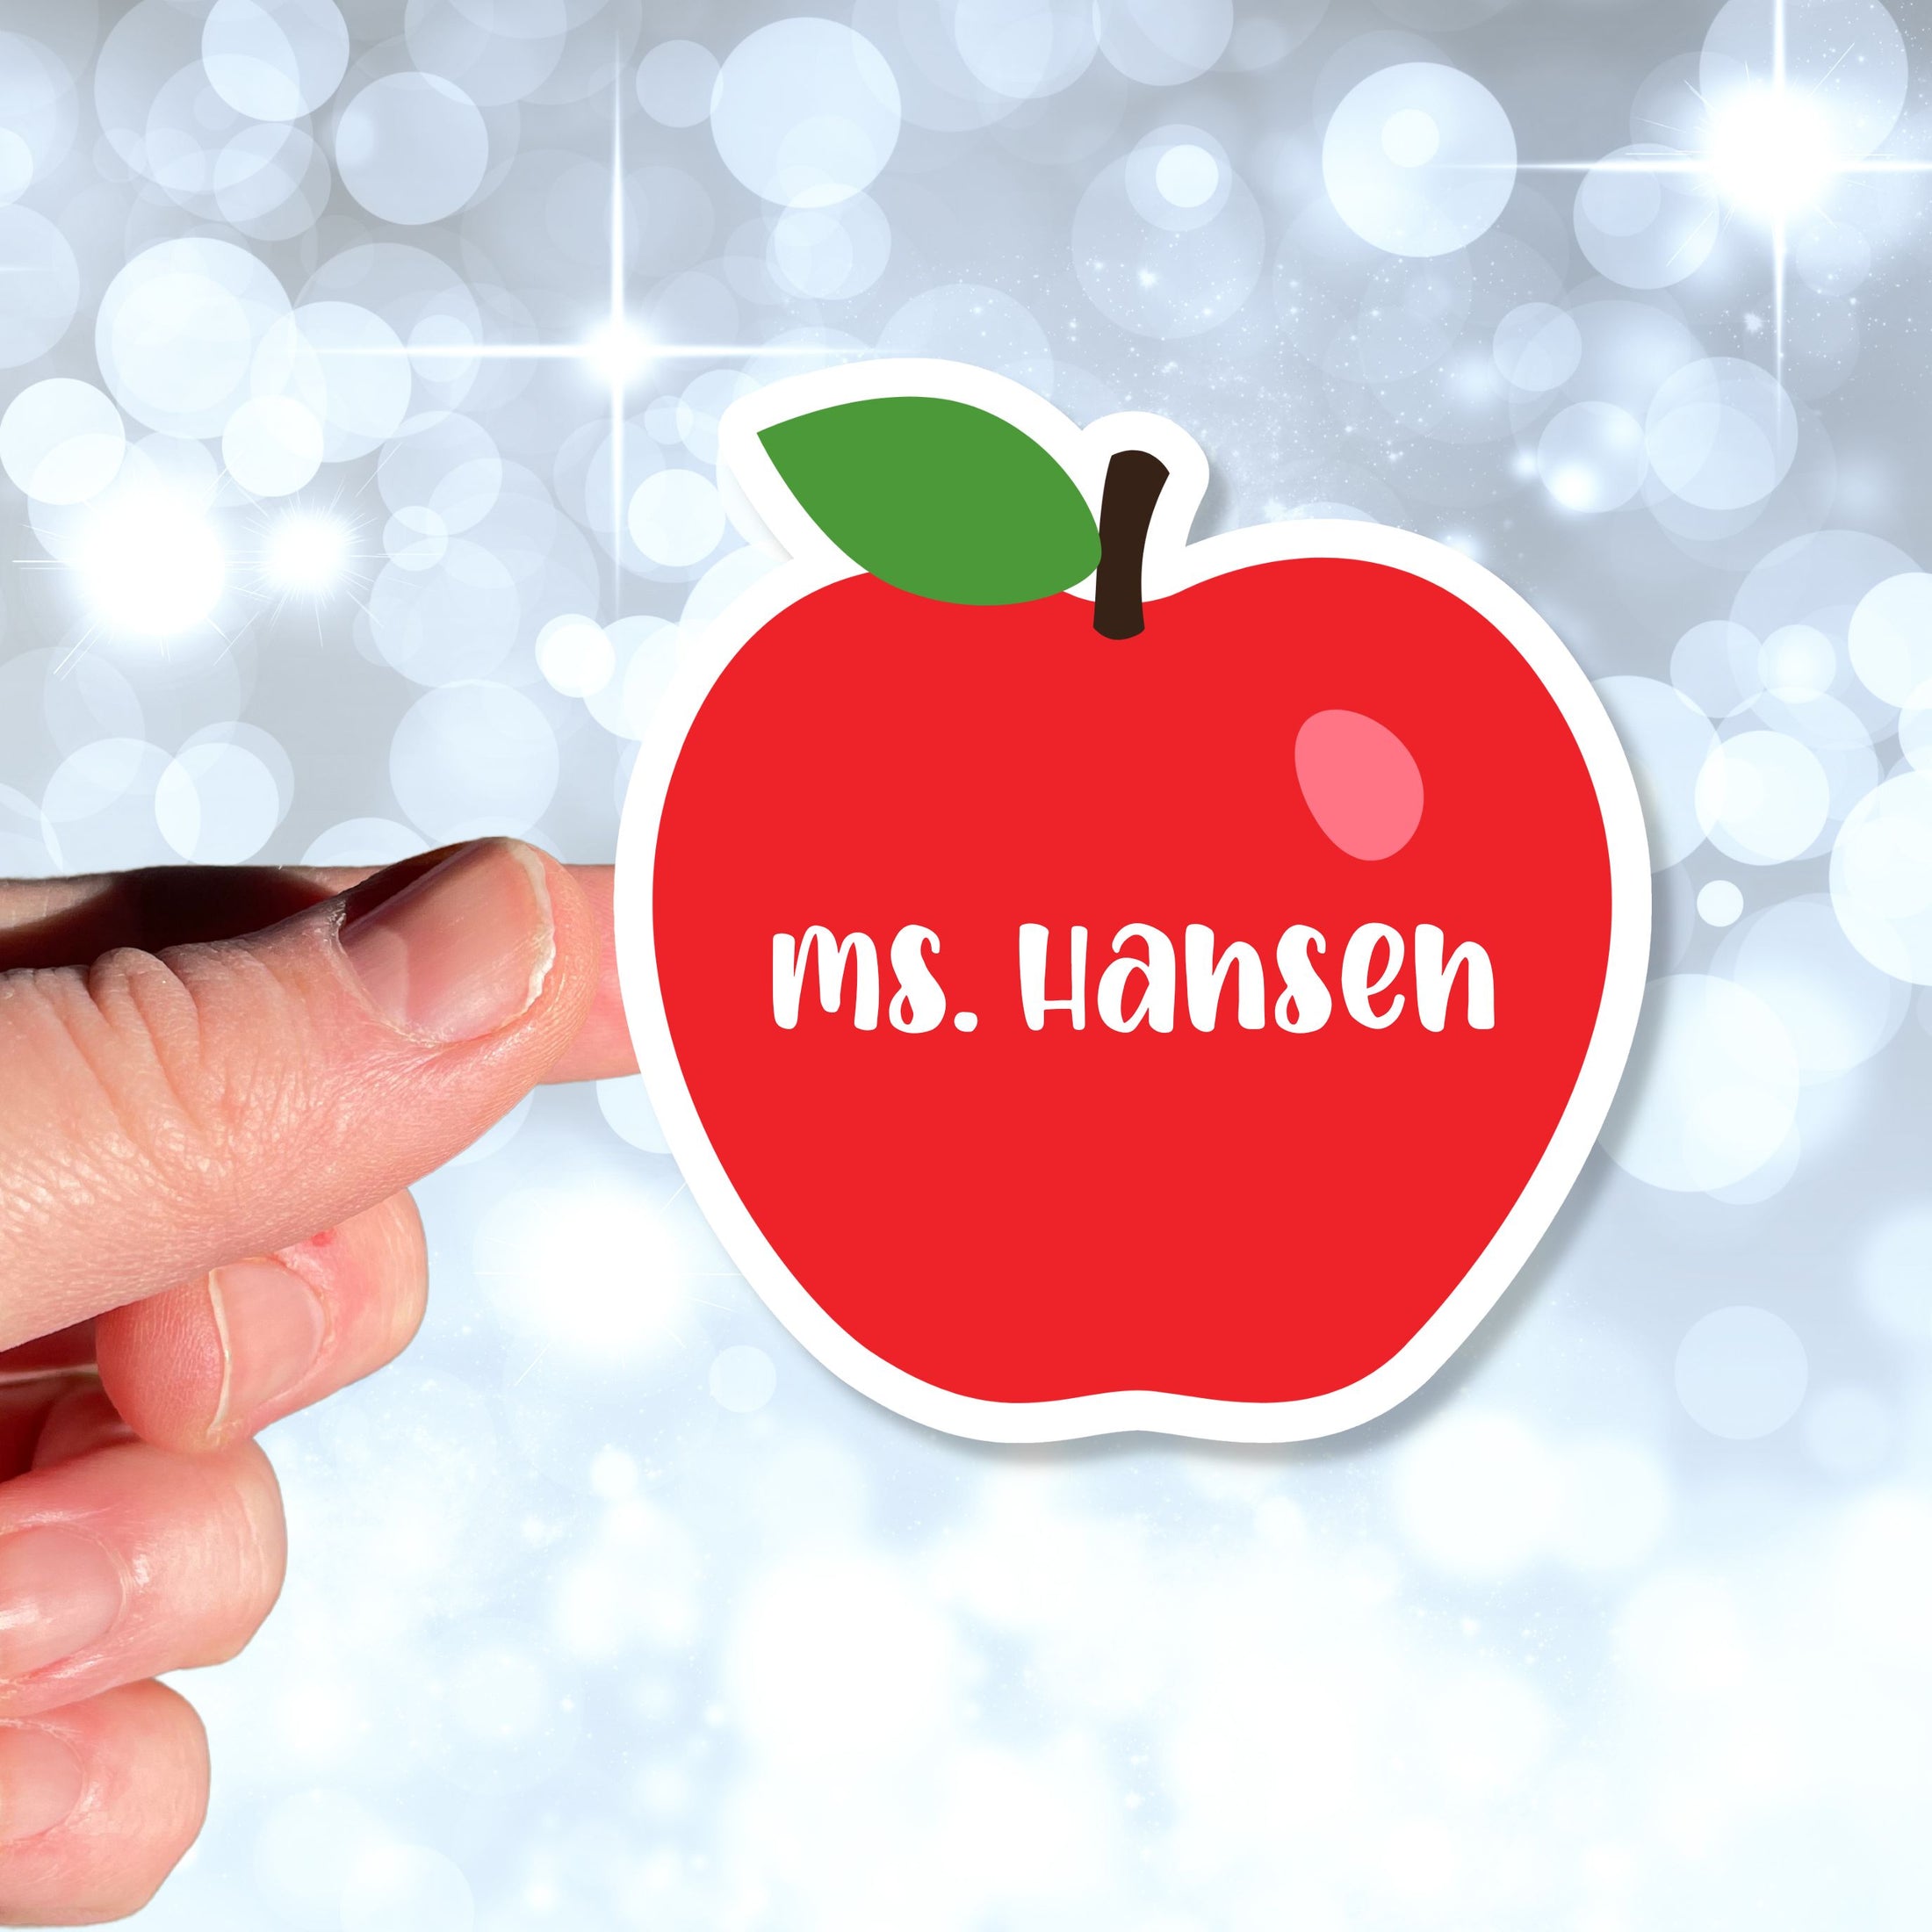 This image shows a hand holding the personalized school sticker.